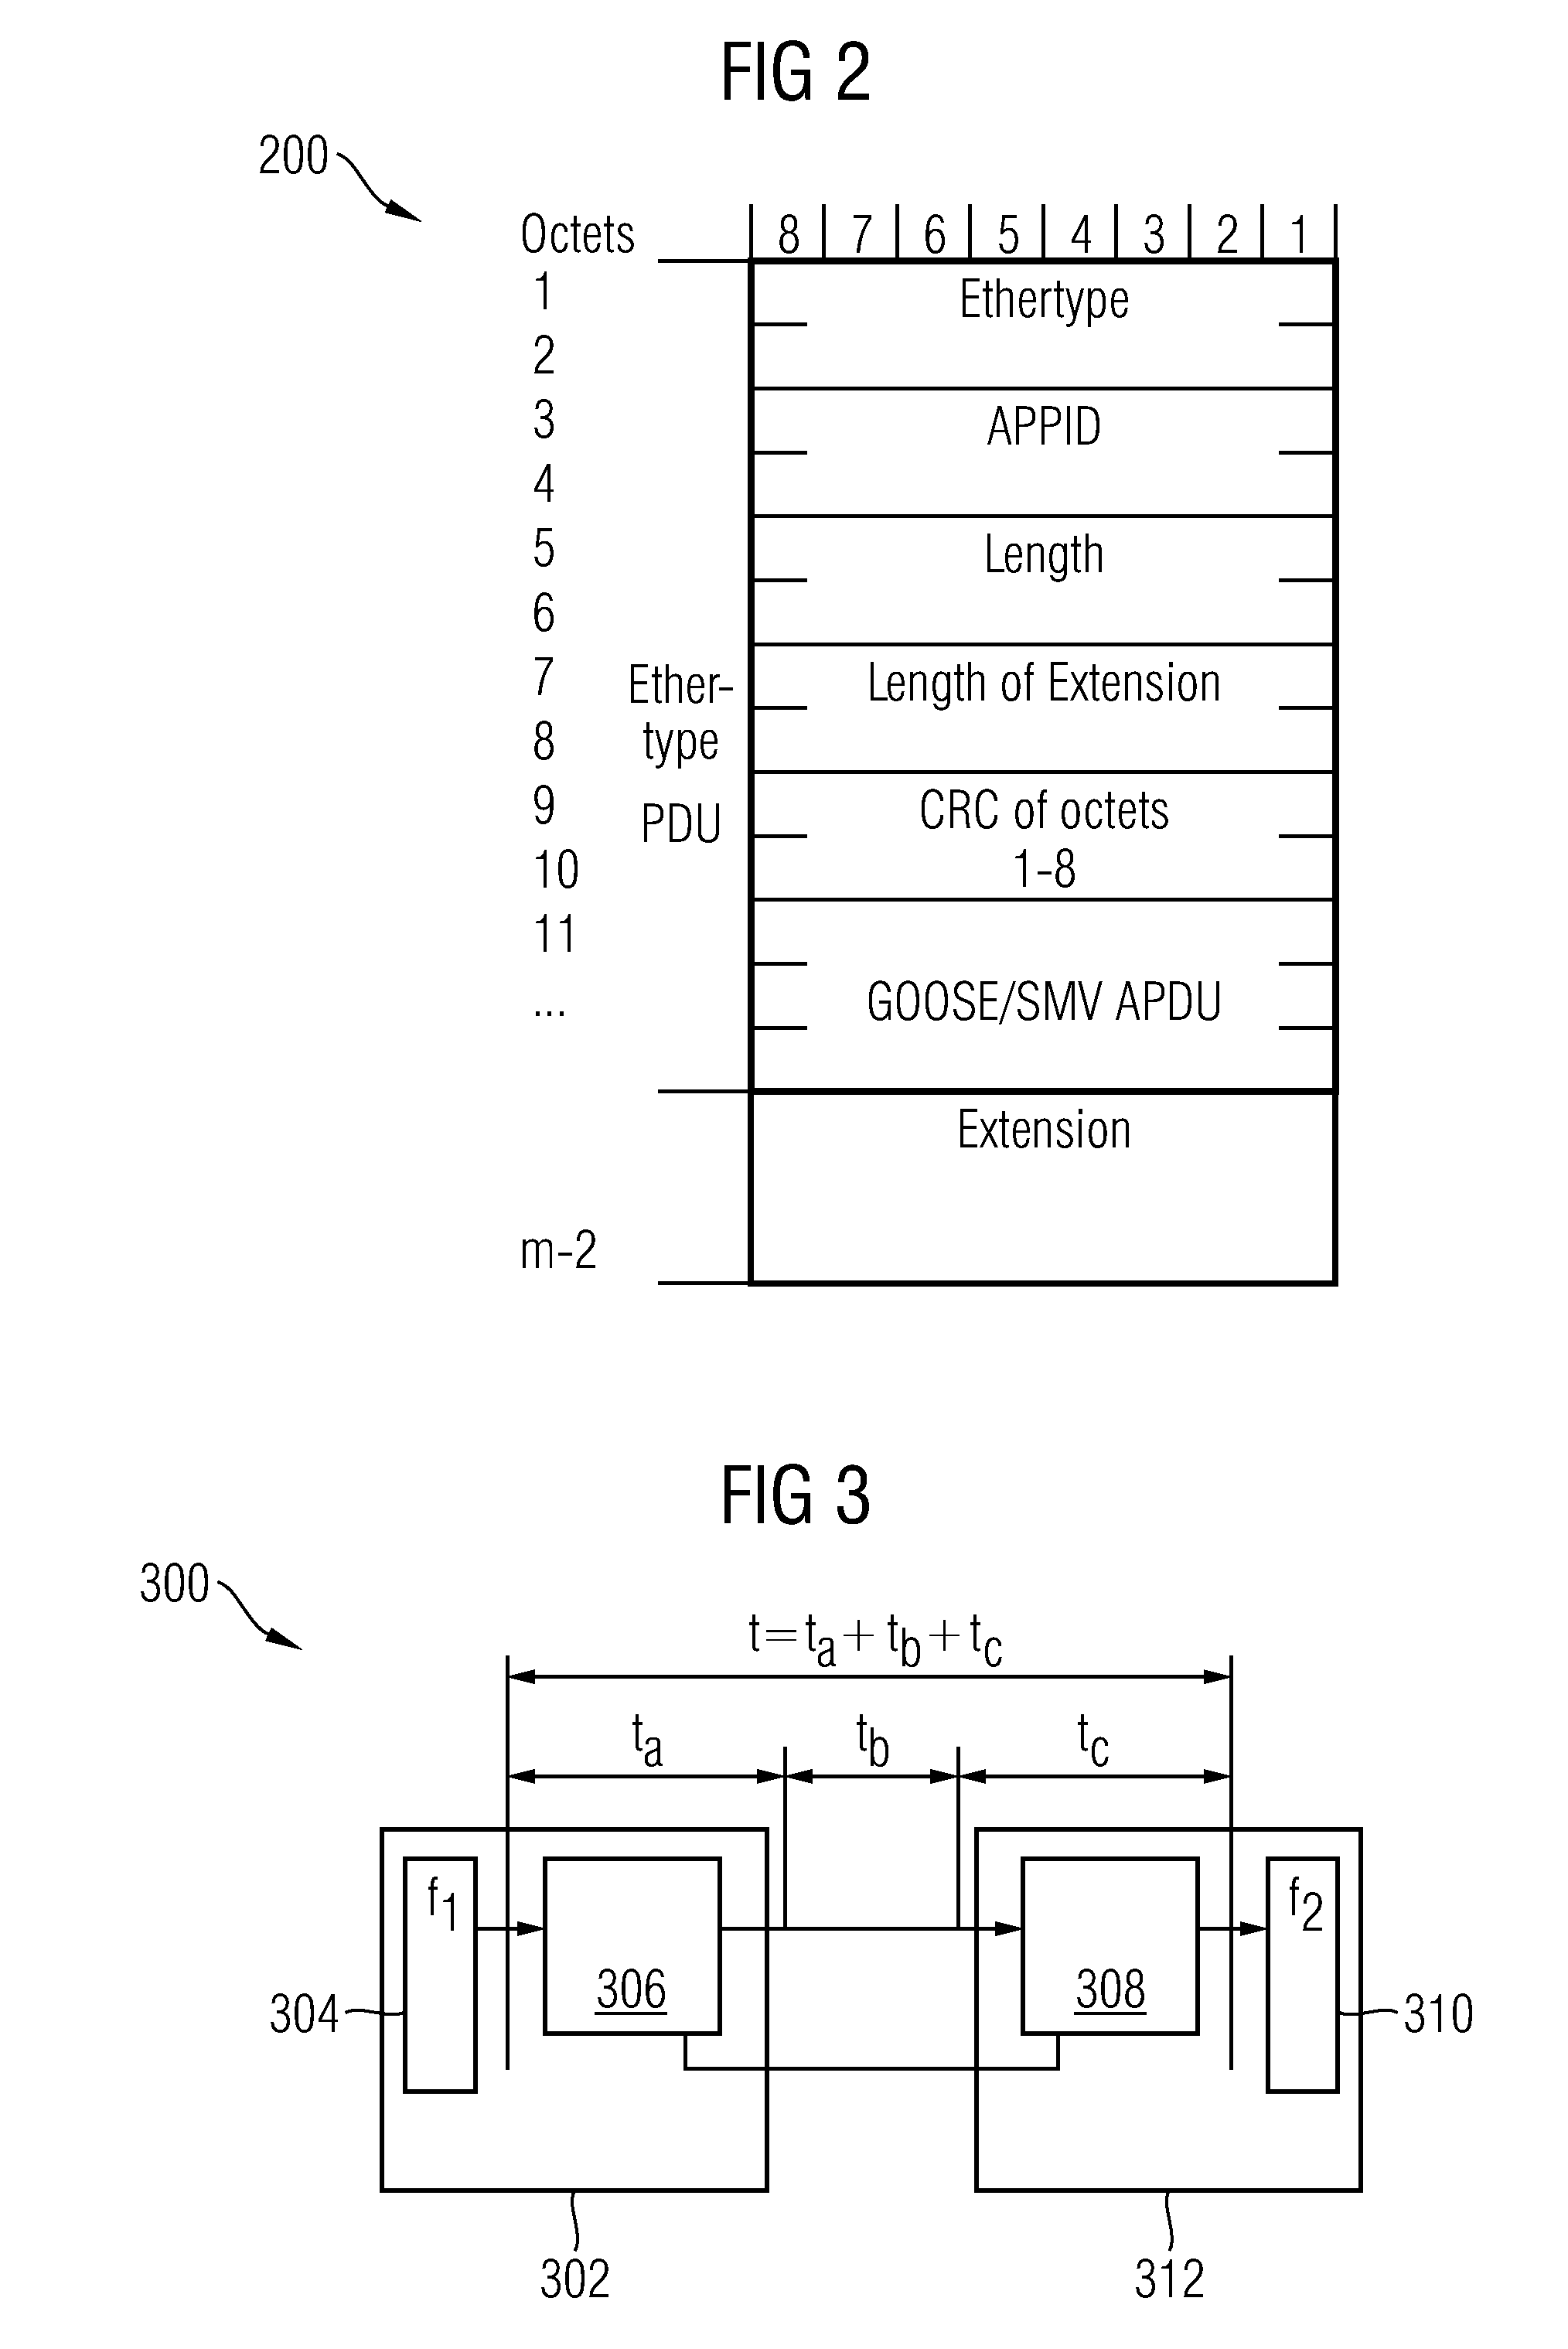 Method of group key generation and management for generic object oriented substantiation events model